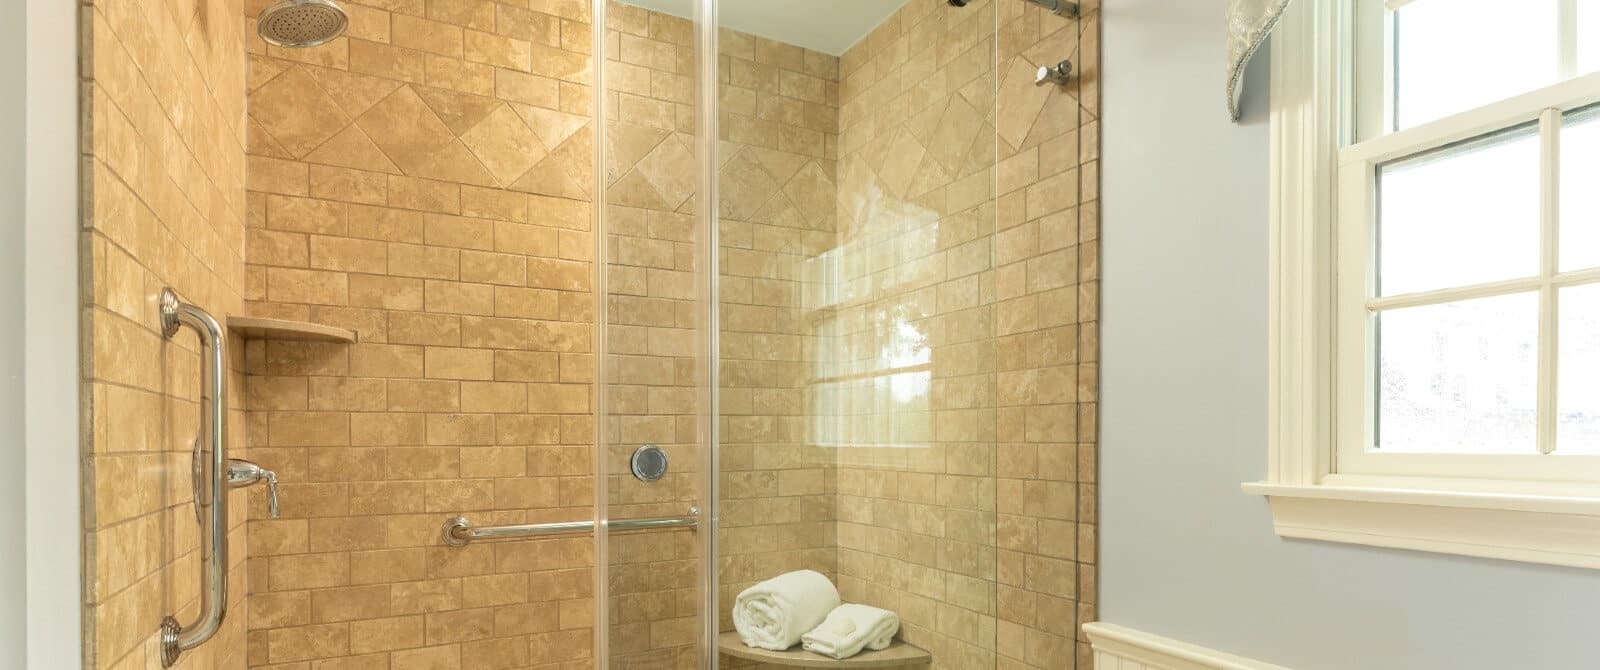 Large tiled shower with glass doors next to a bright window